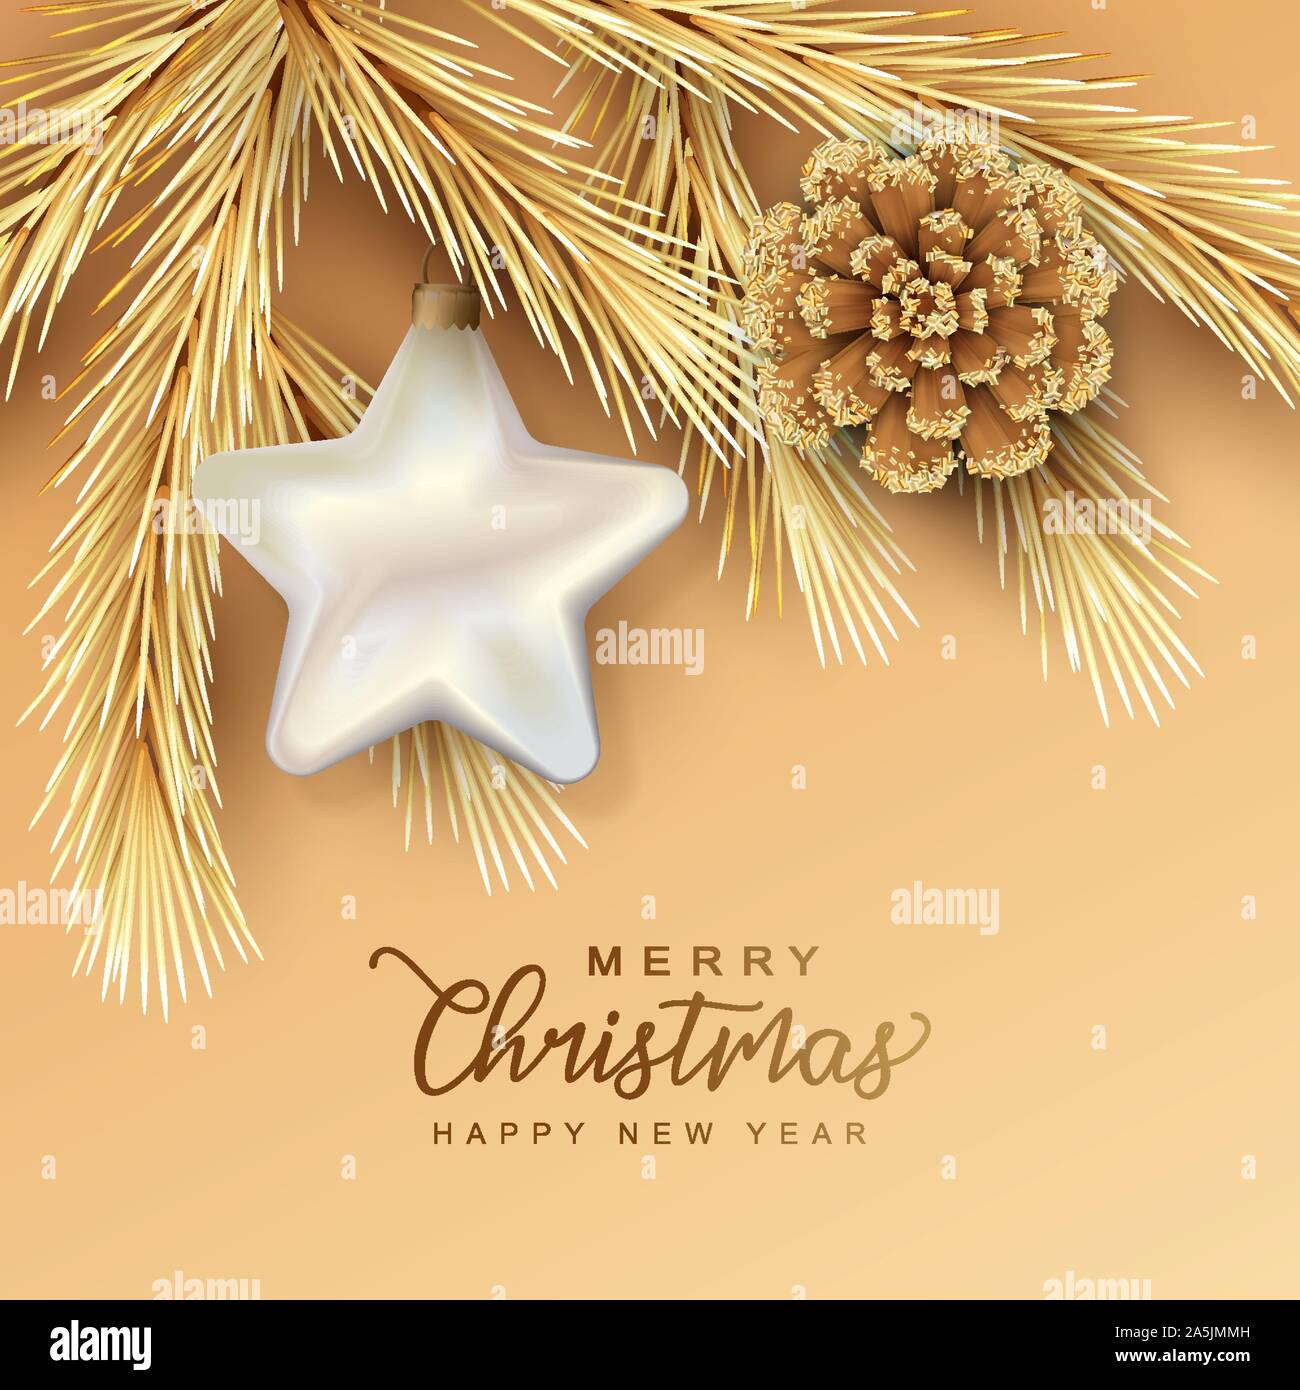 Merry Christmas Background Stock Vector